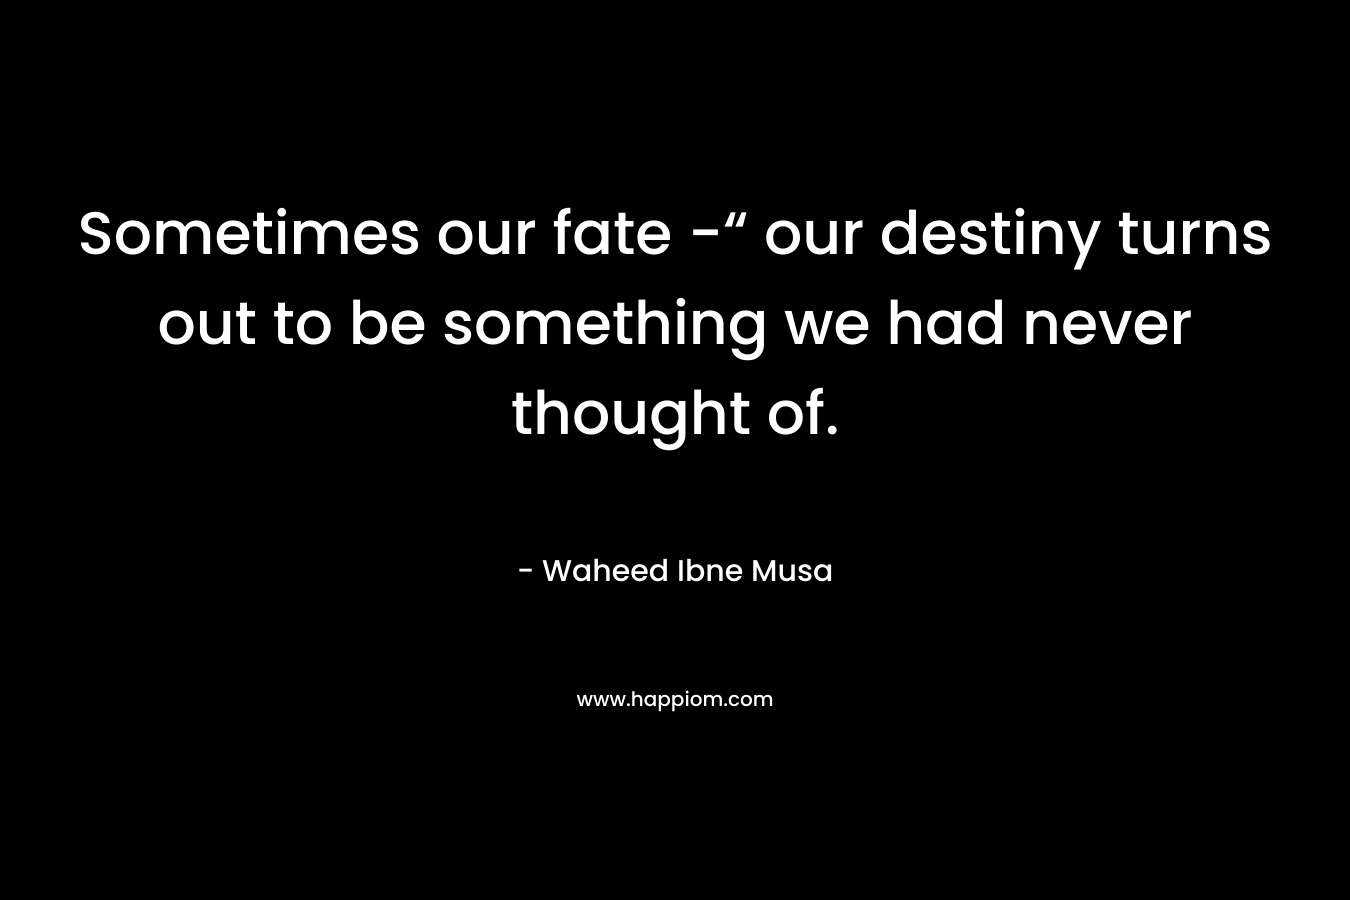 Sometimes our fate -“ our destiny turns out to be something we had never thought of. – Waheed Ibne Musa